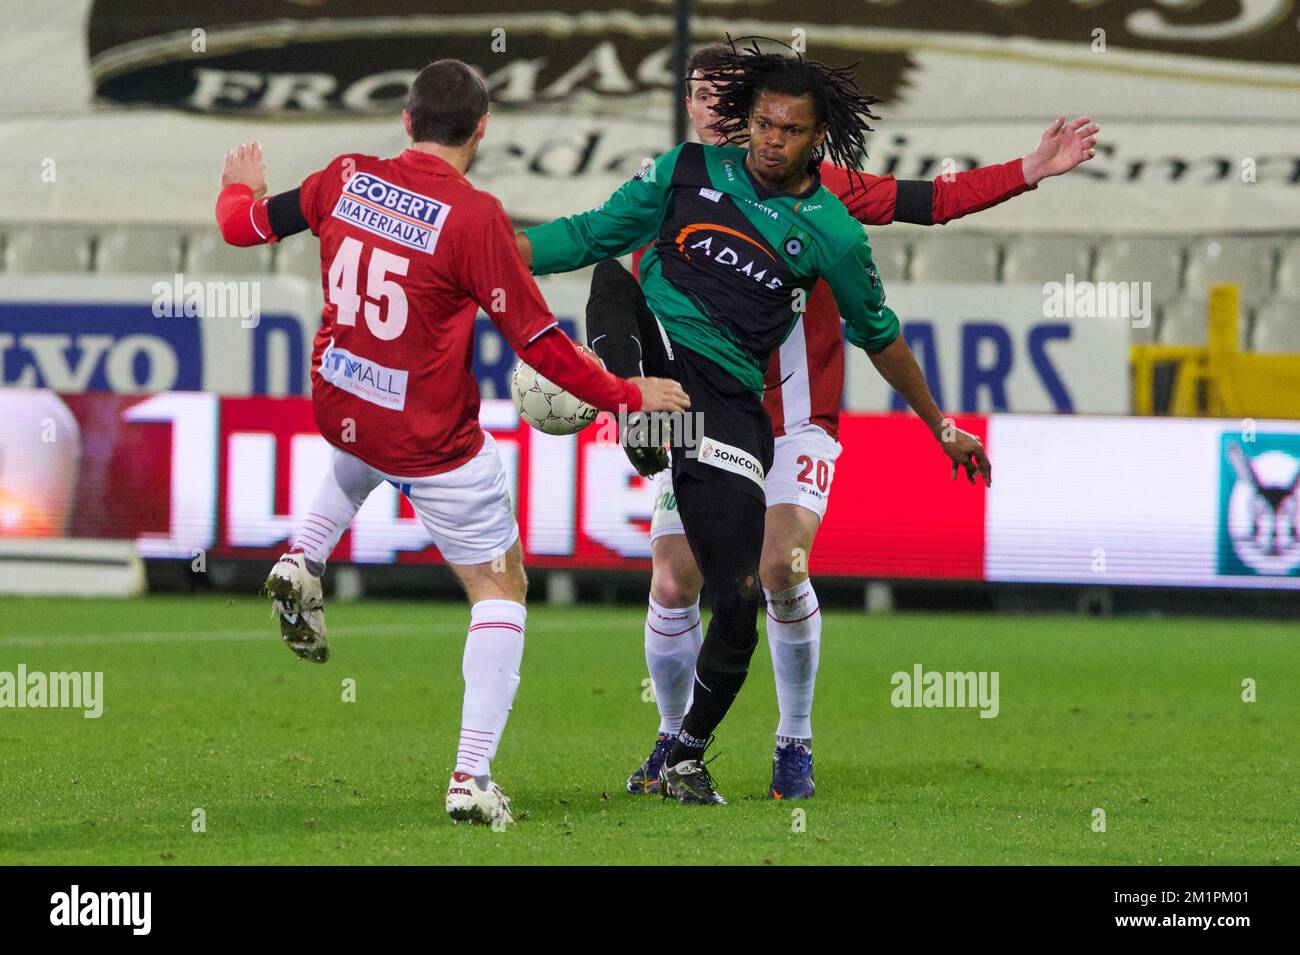 20130309 - BRUGGE, BELGIUM: Mons' Gregory Lorenzi and Cercle's Michael Uchebo fight for the ball during the Jupiler Pro League match between Cercle Brugge and Mons, in Brugge, Saturday 09 March 2013, on day 29 of the Belgian soccer championship. BELGA PHOTO KURT DESPLENTER Stock Photo